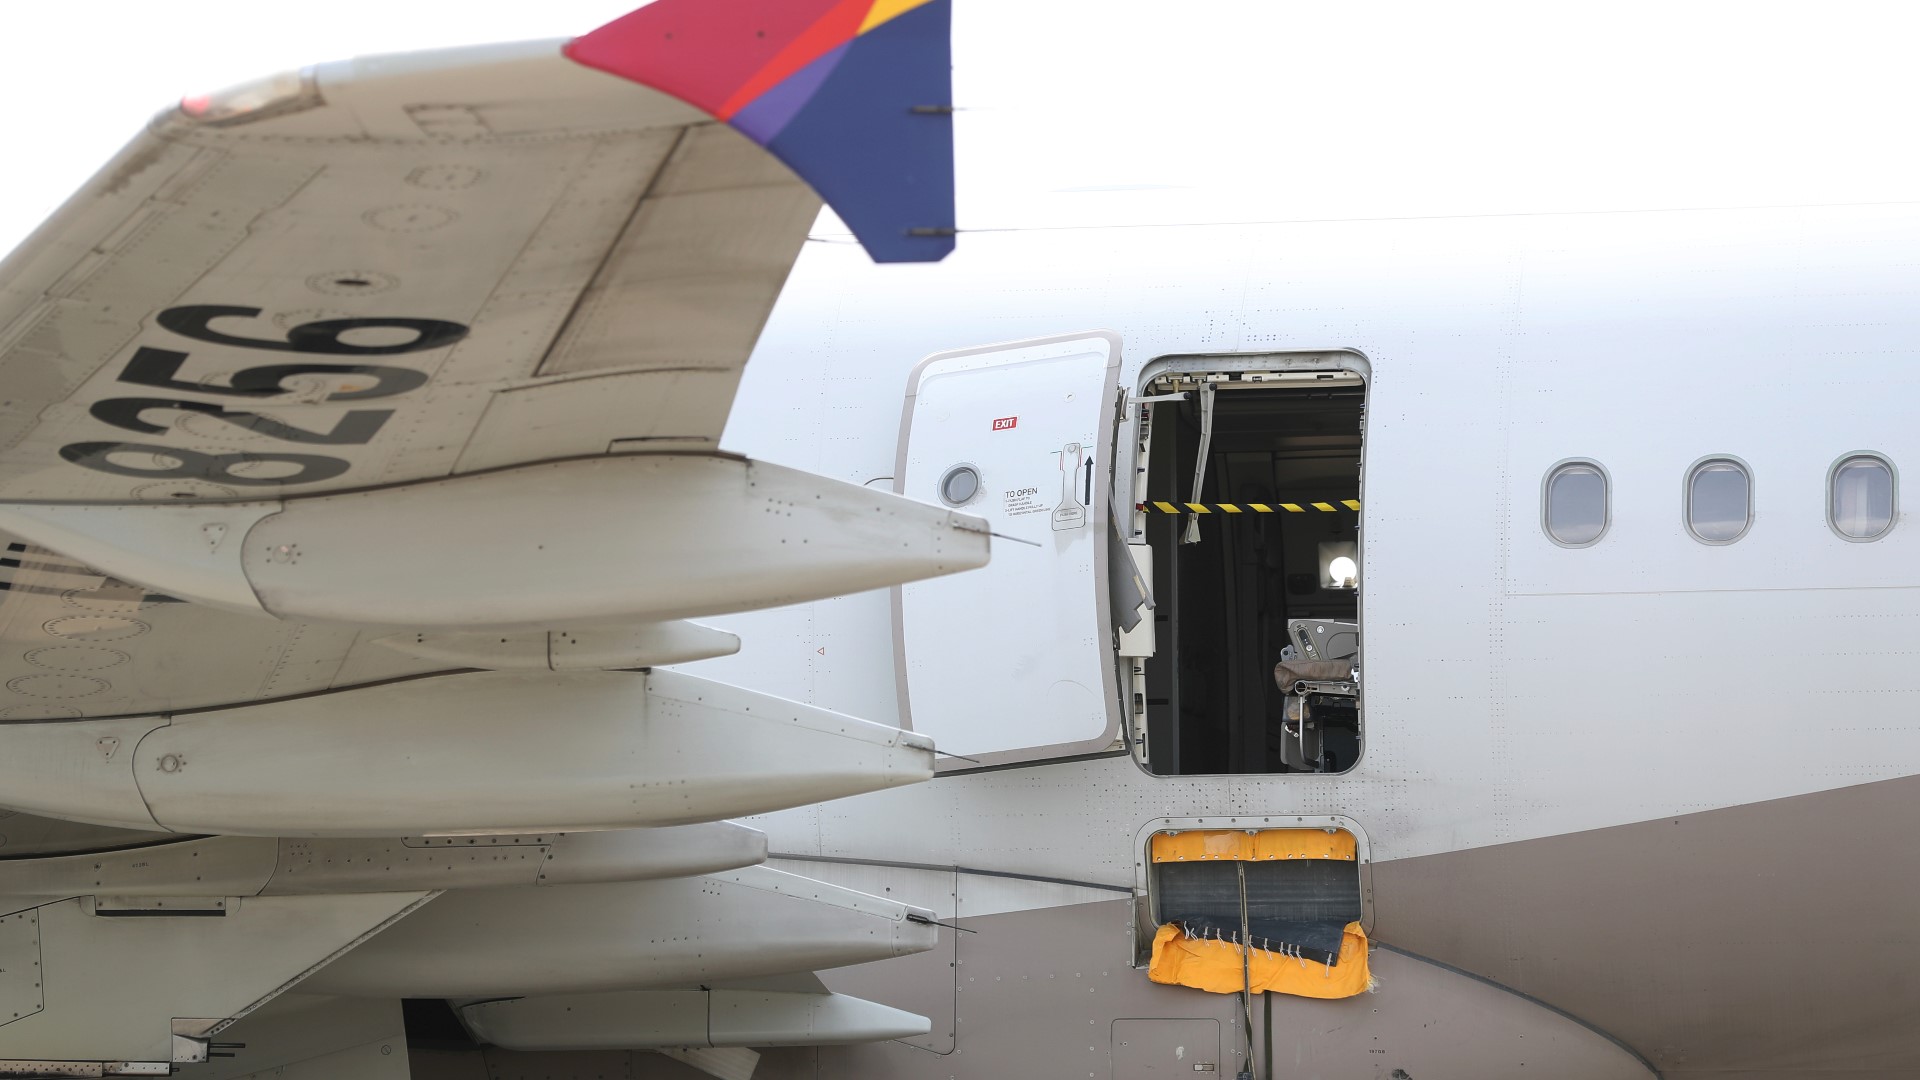 Asiana Airlines and government officials say a passenger opened an emergency exit door during a flight in South Korea.